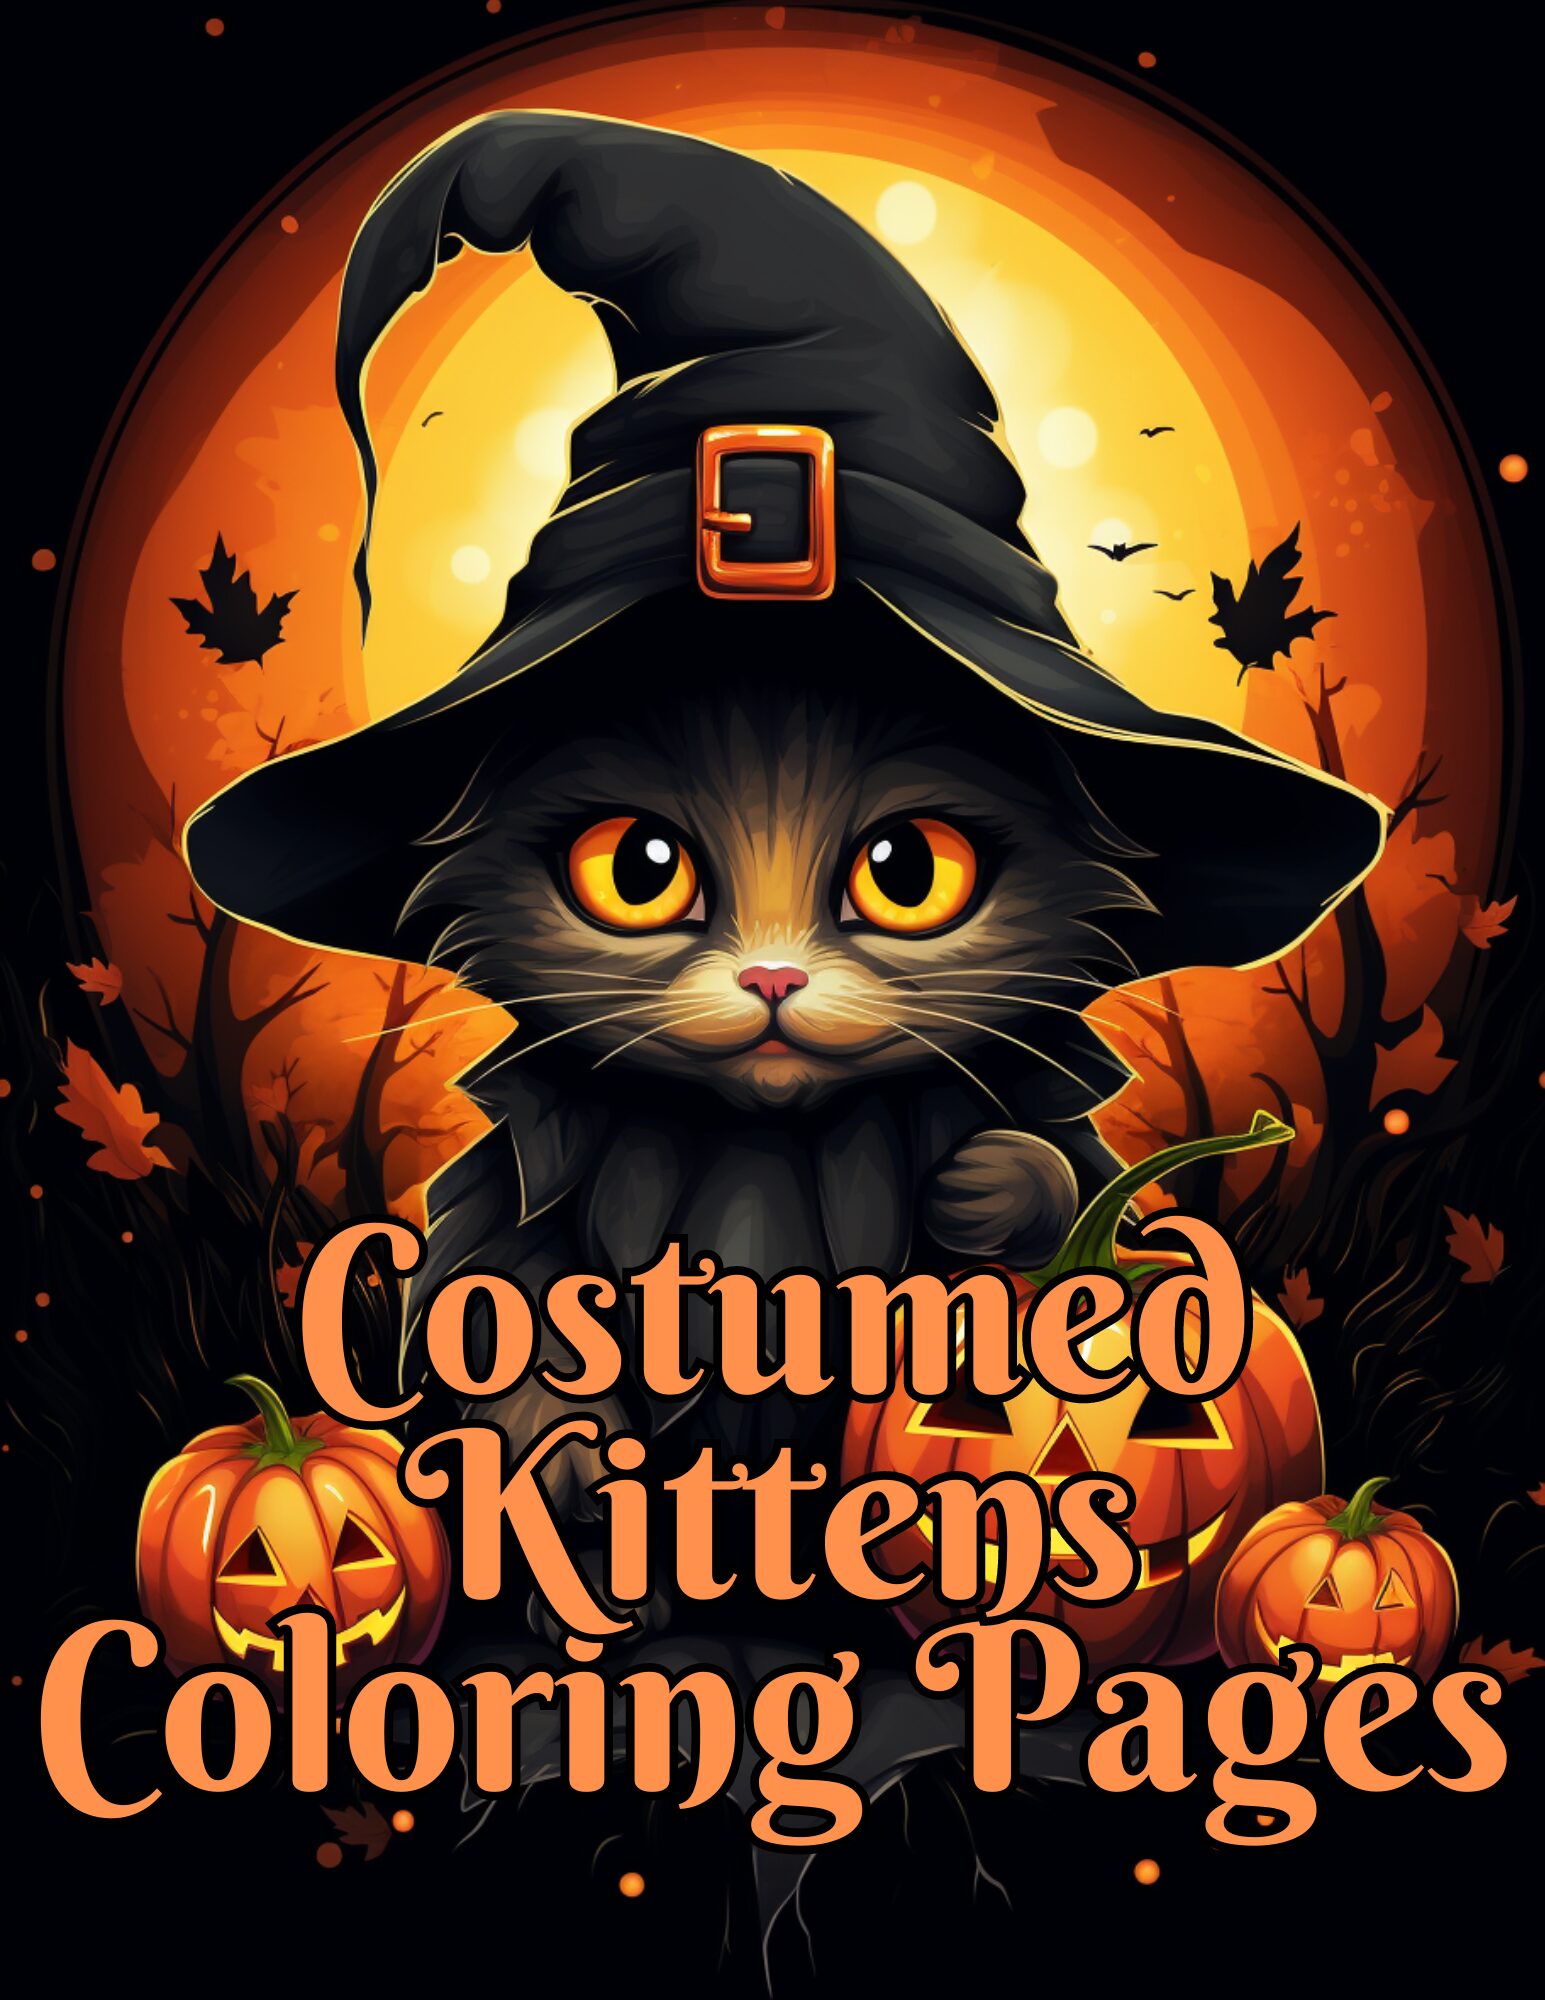 Comfy Digitals is a website that offers free digital downloads such as planners, notebooks and coloring books.